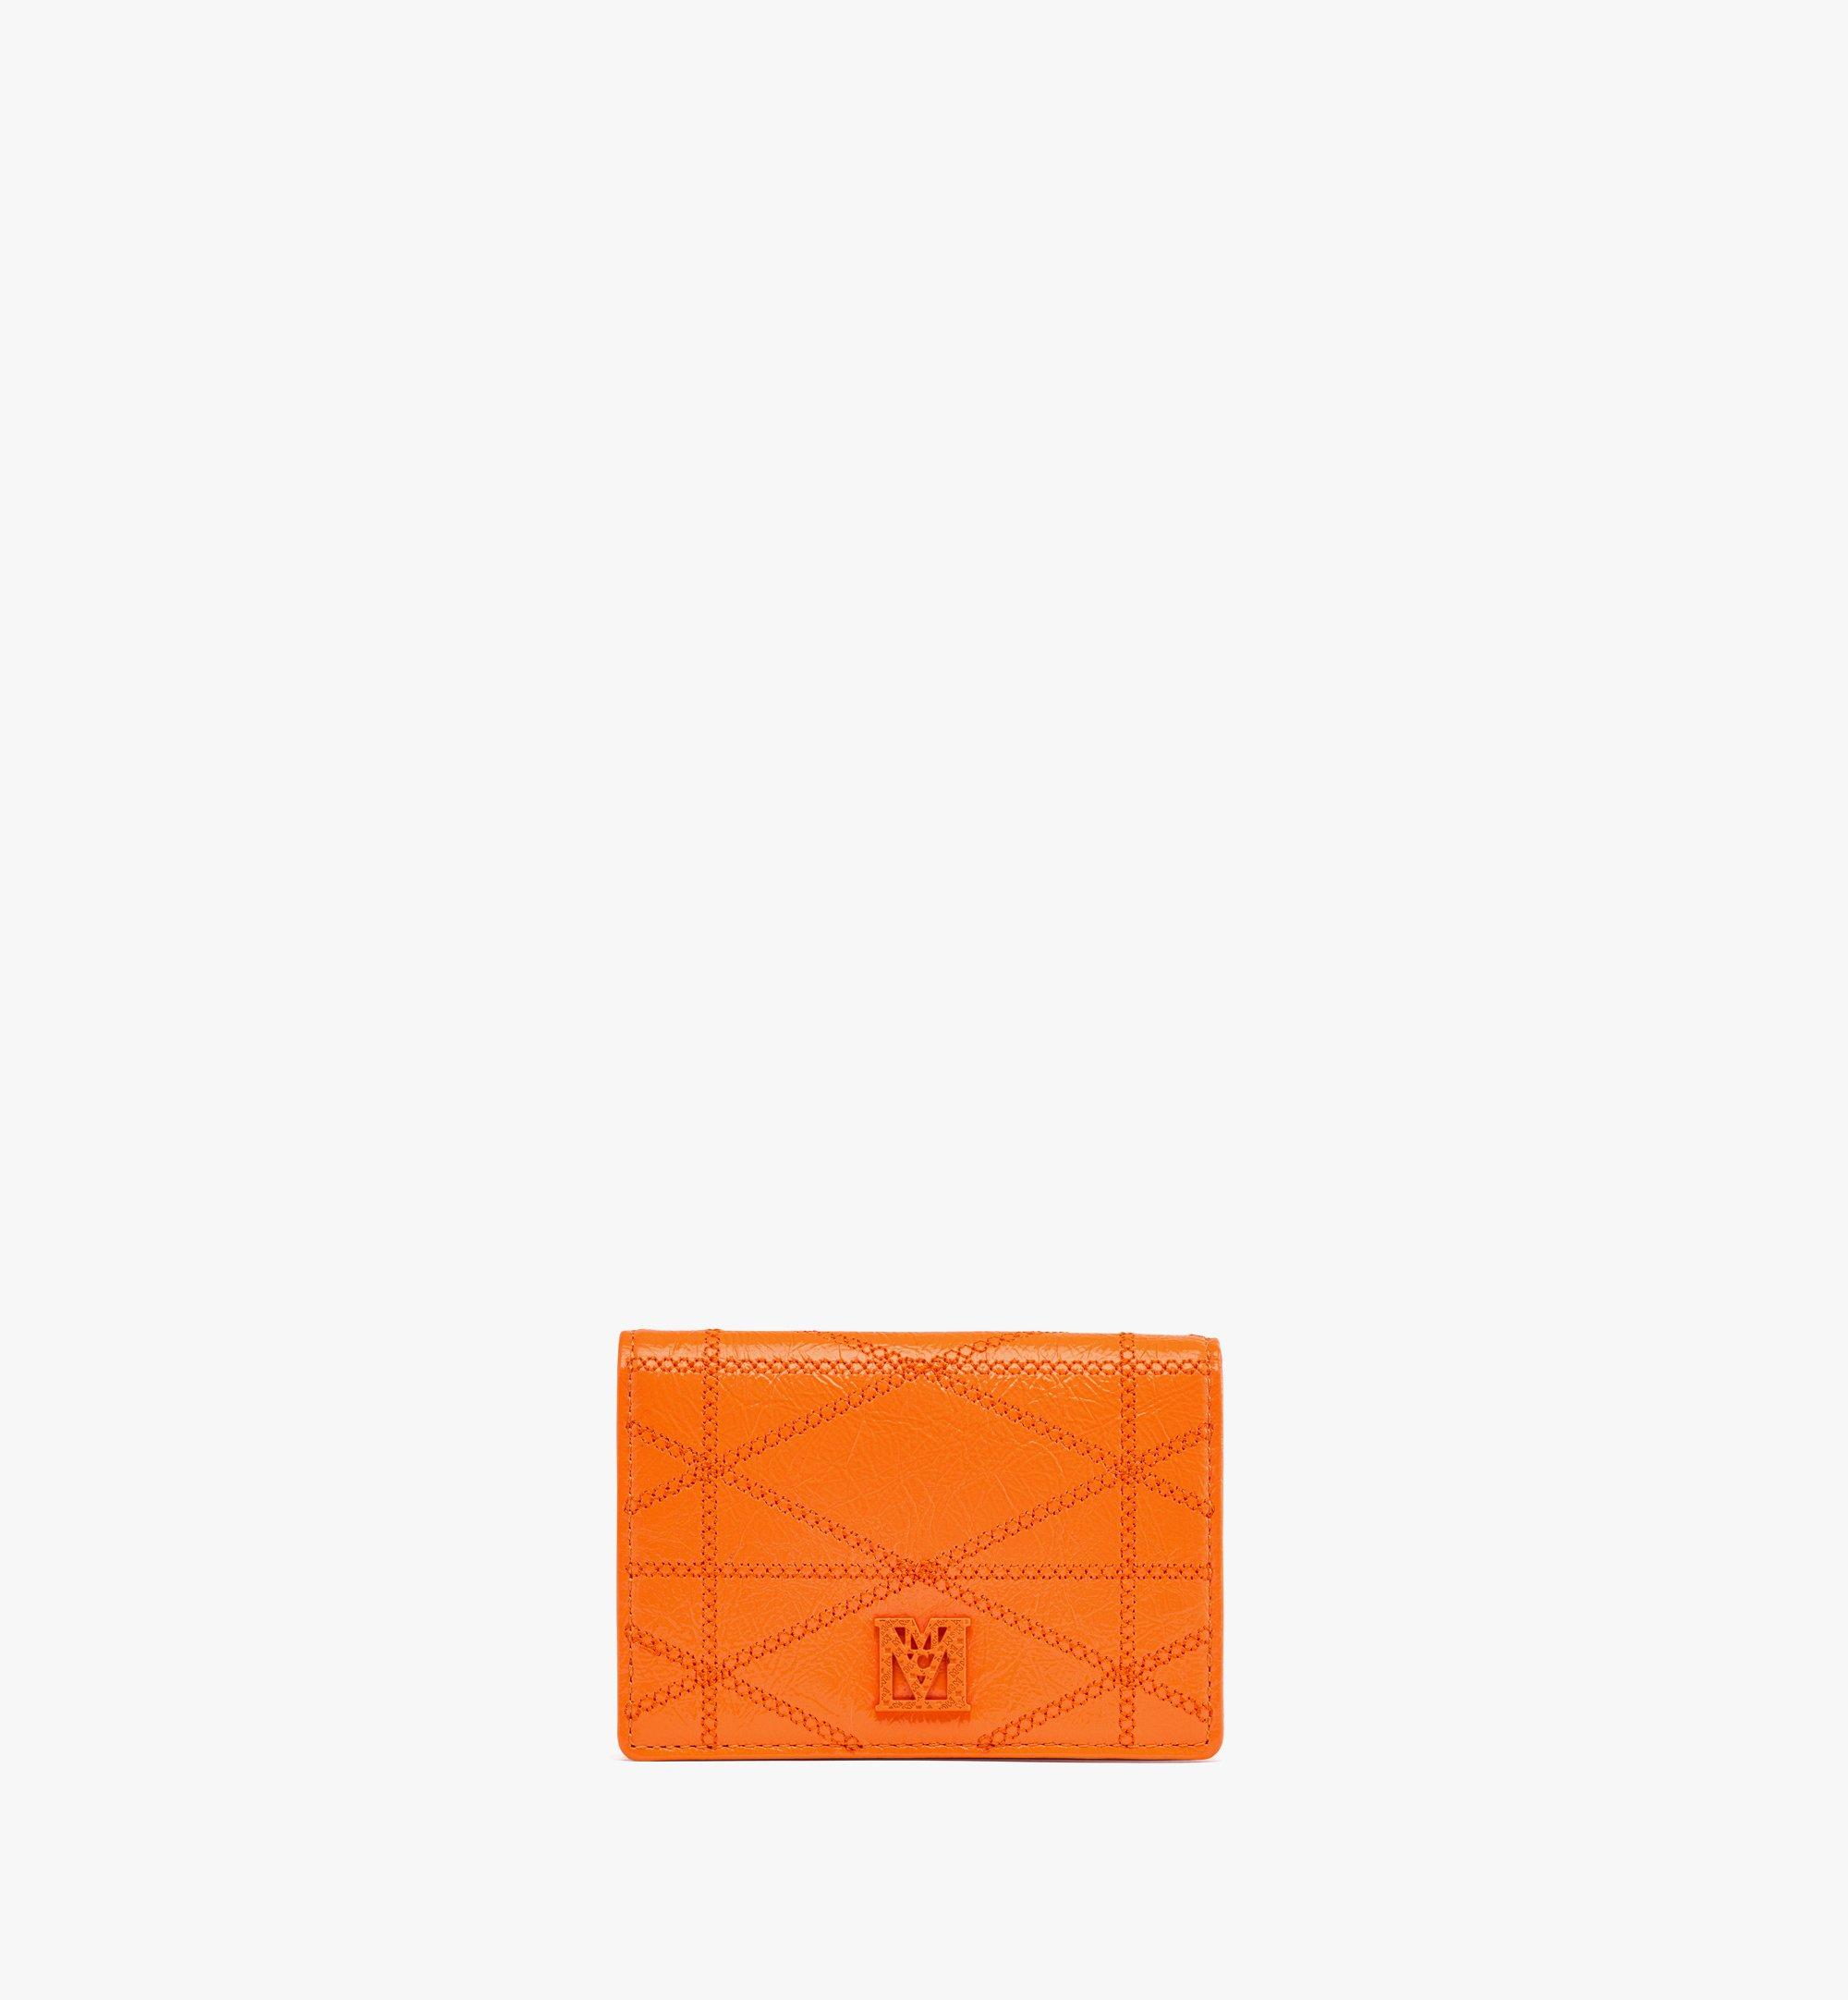 MCM Travia Quilted Card Wallet in Crushed Leather Orange MYADALM01O0001 Alternate View 1